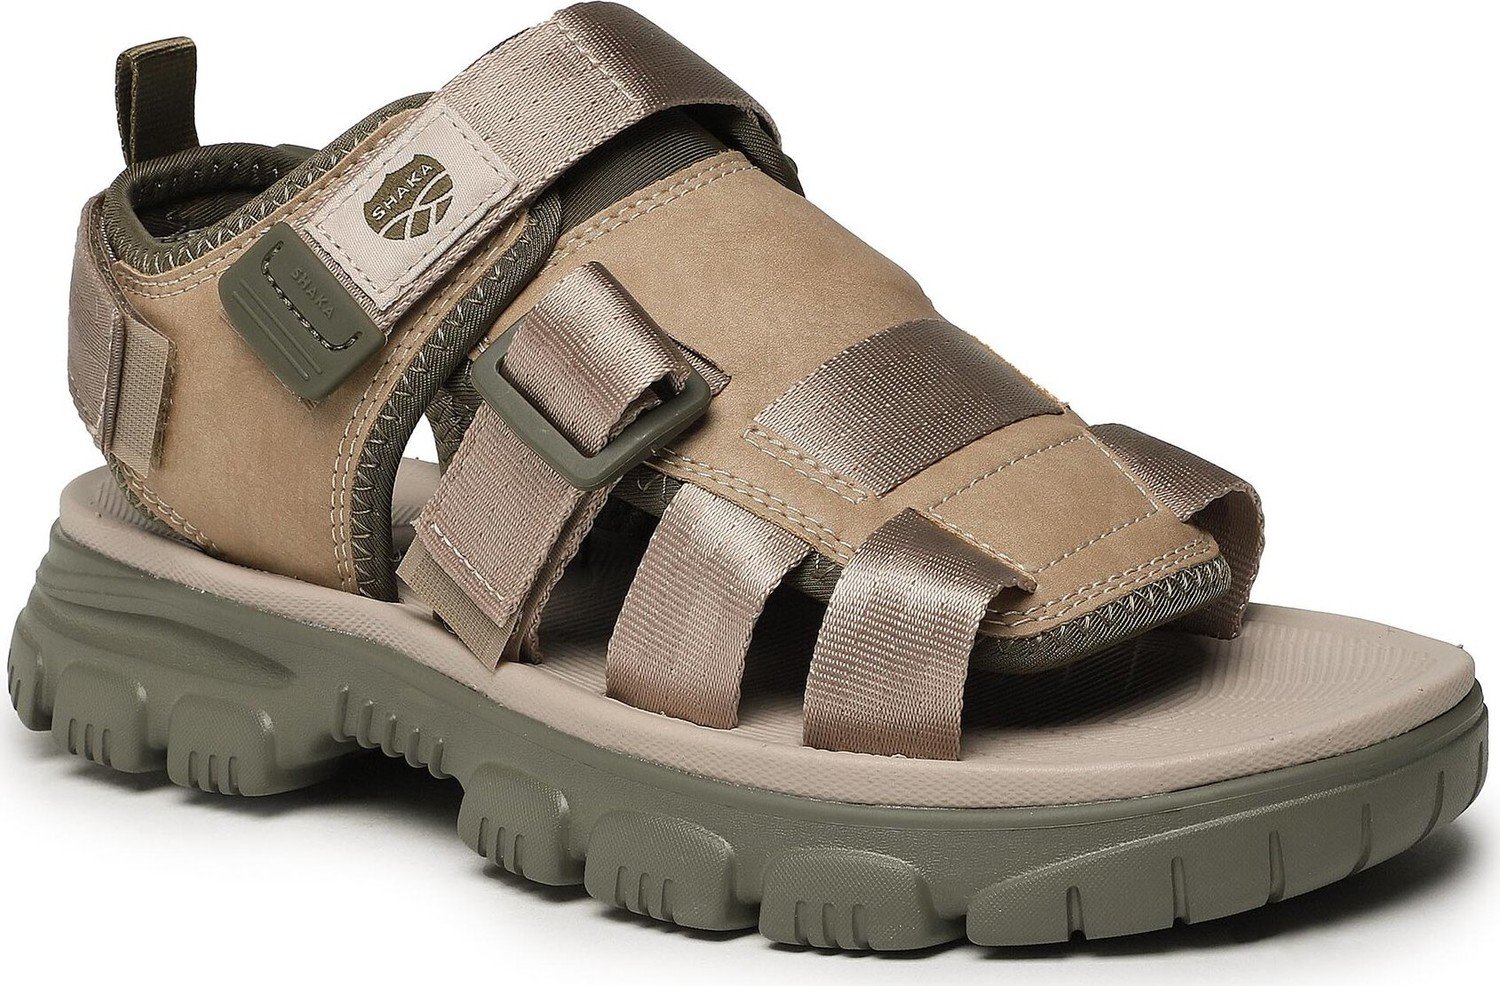 Sandály Shaka Azteca At SK-148 Taupe/Army 02N